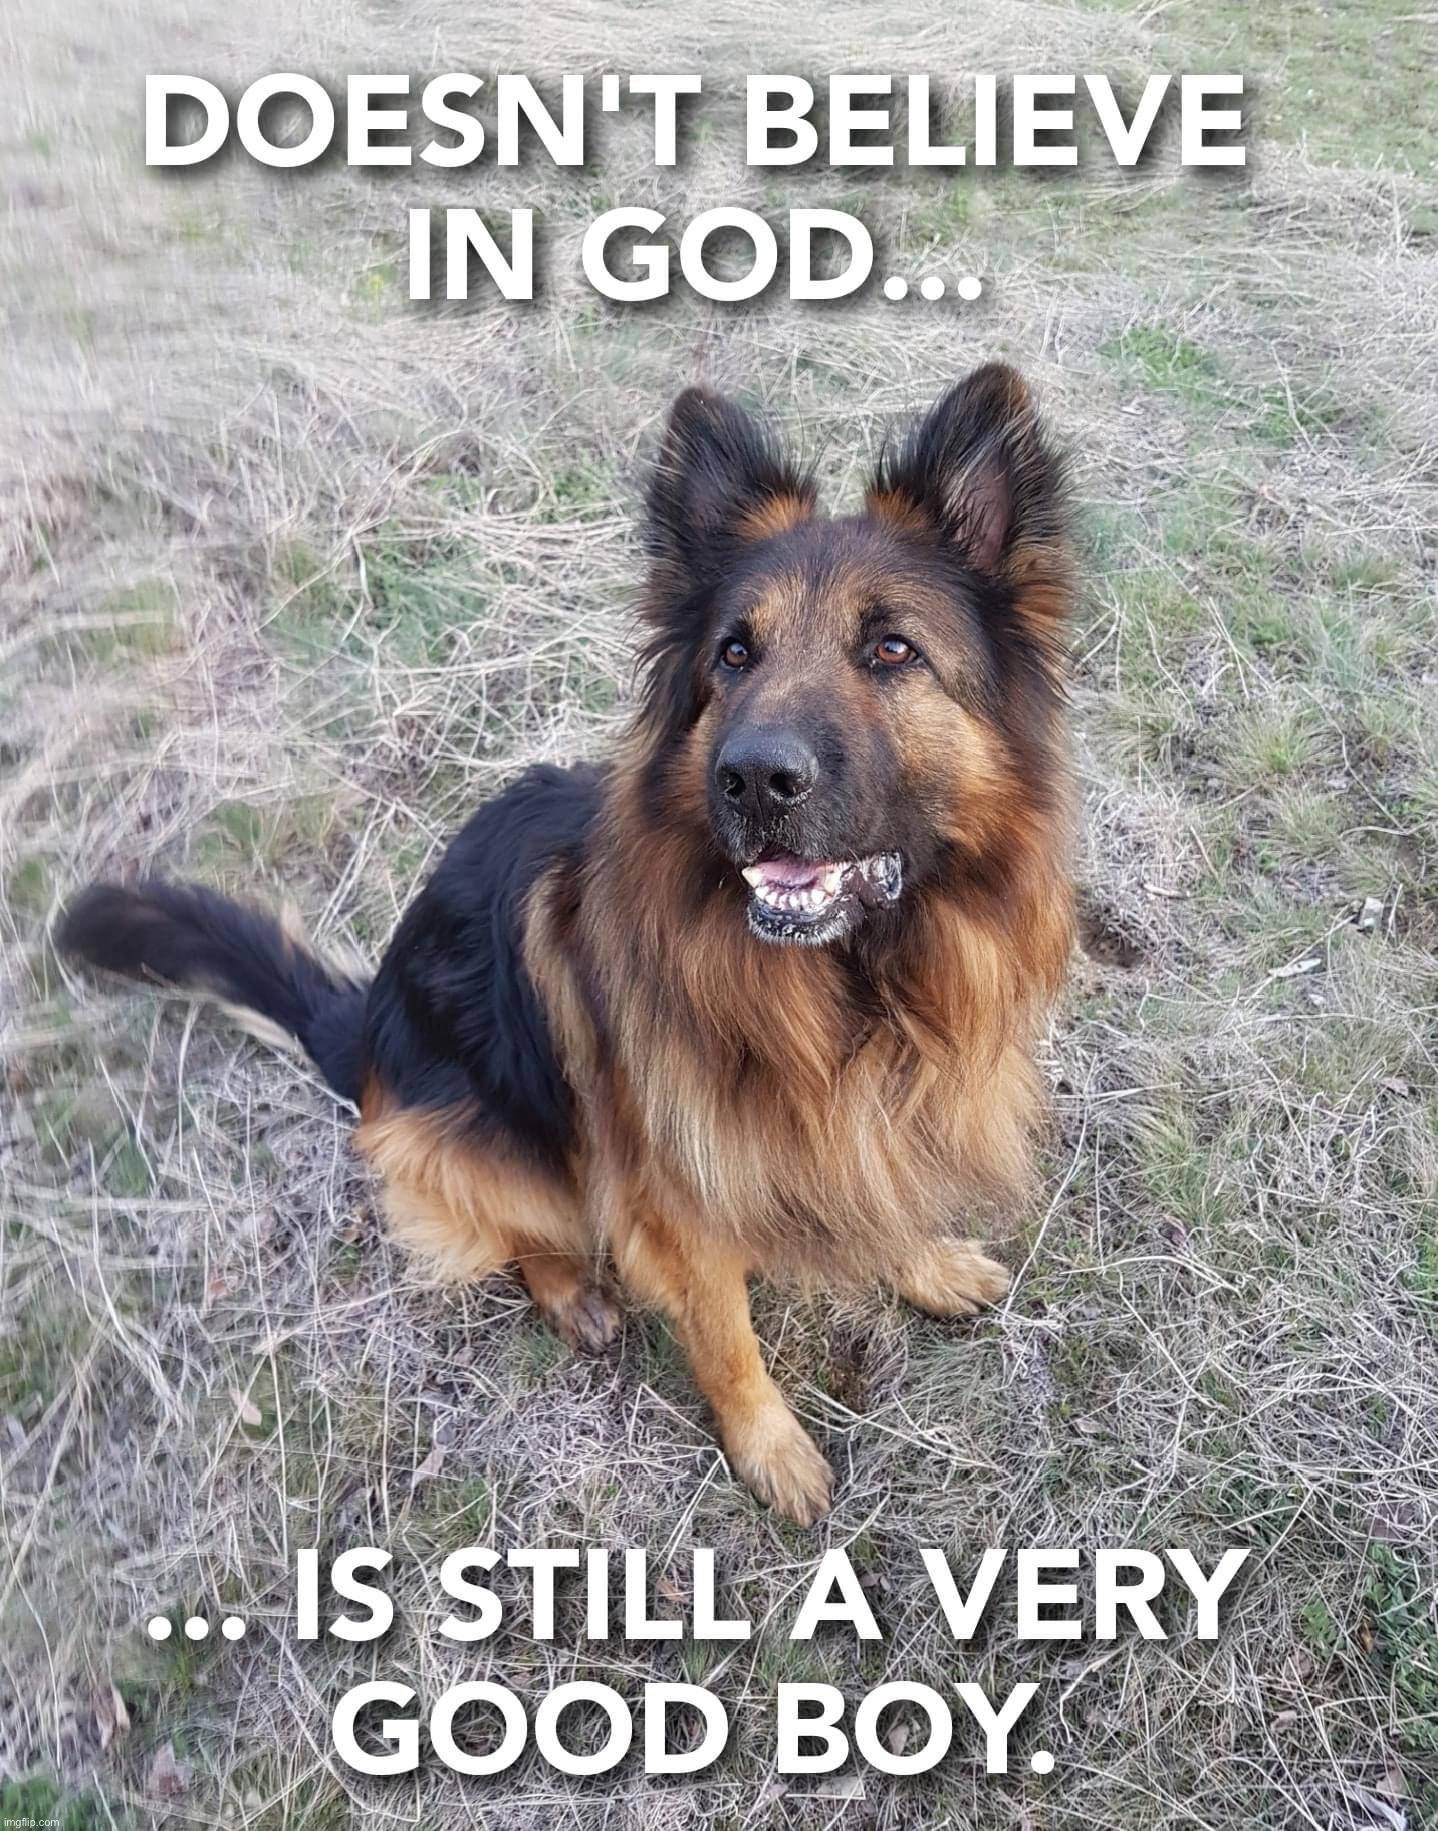 Dog doesn’t believe in God | image tagged in dog doesn t believe in god | made w/ Imgflip meme maker